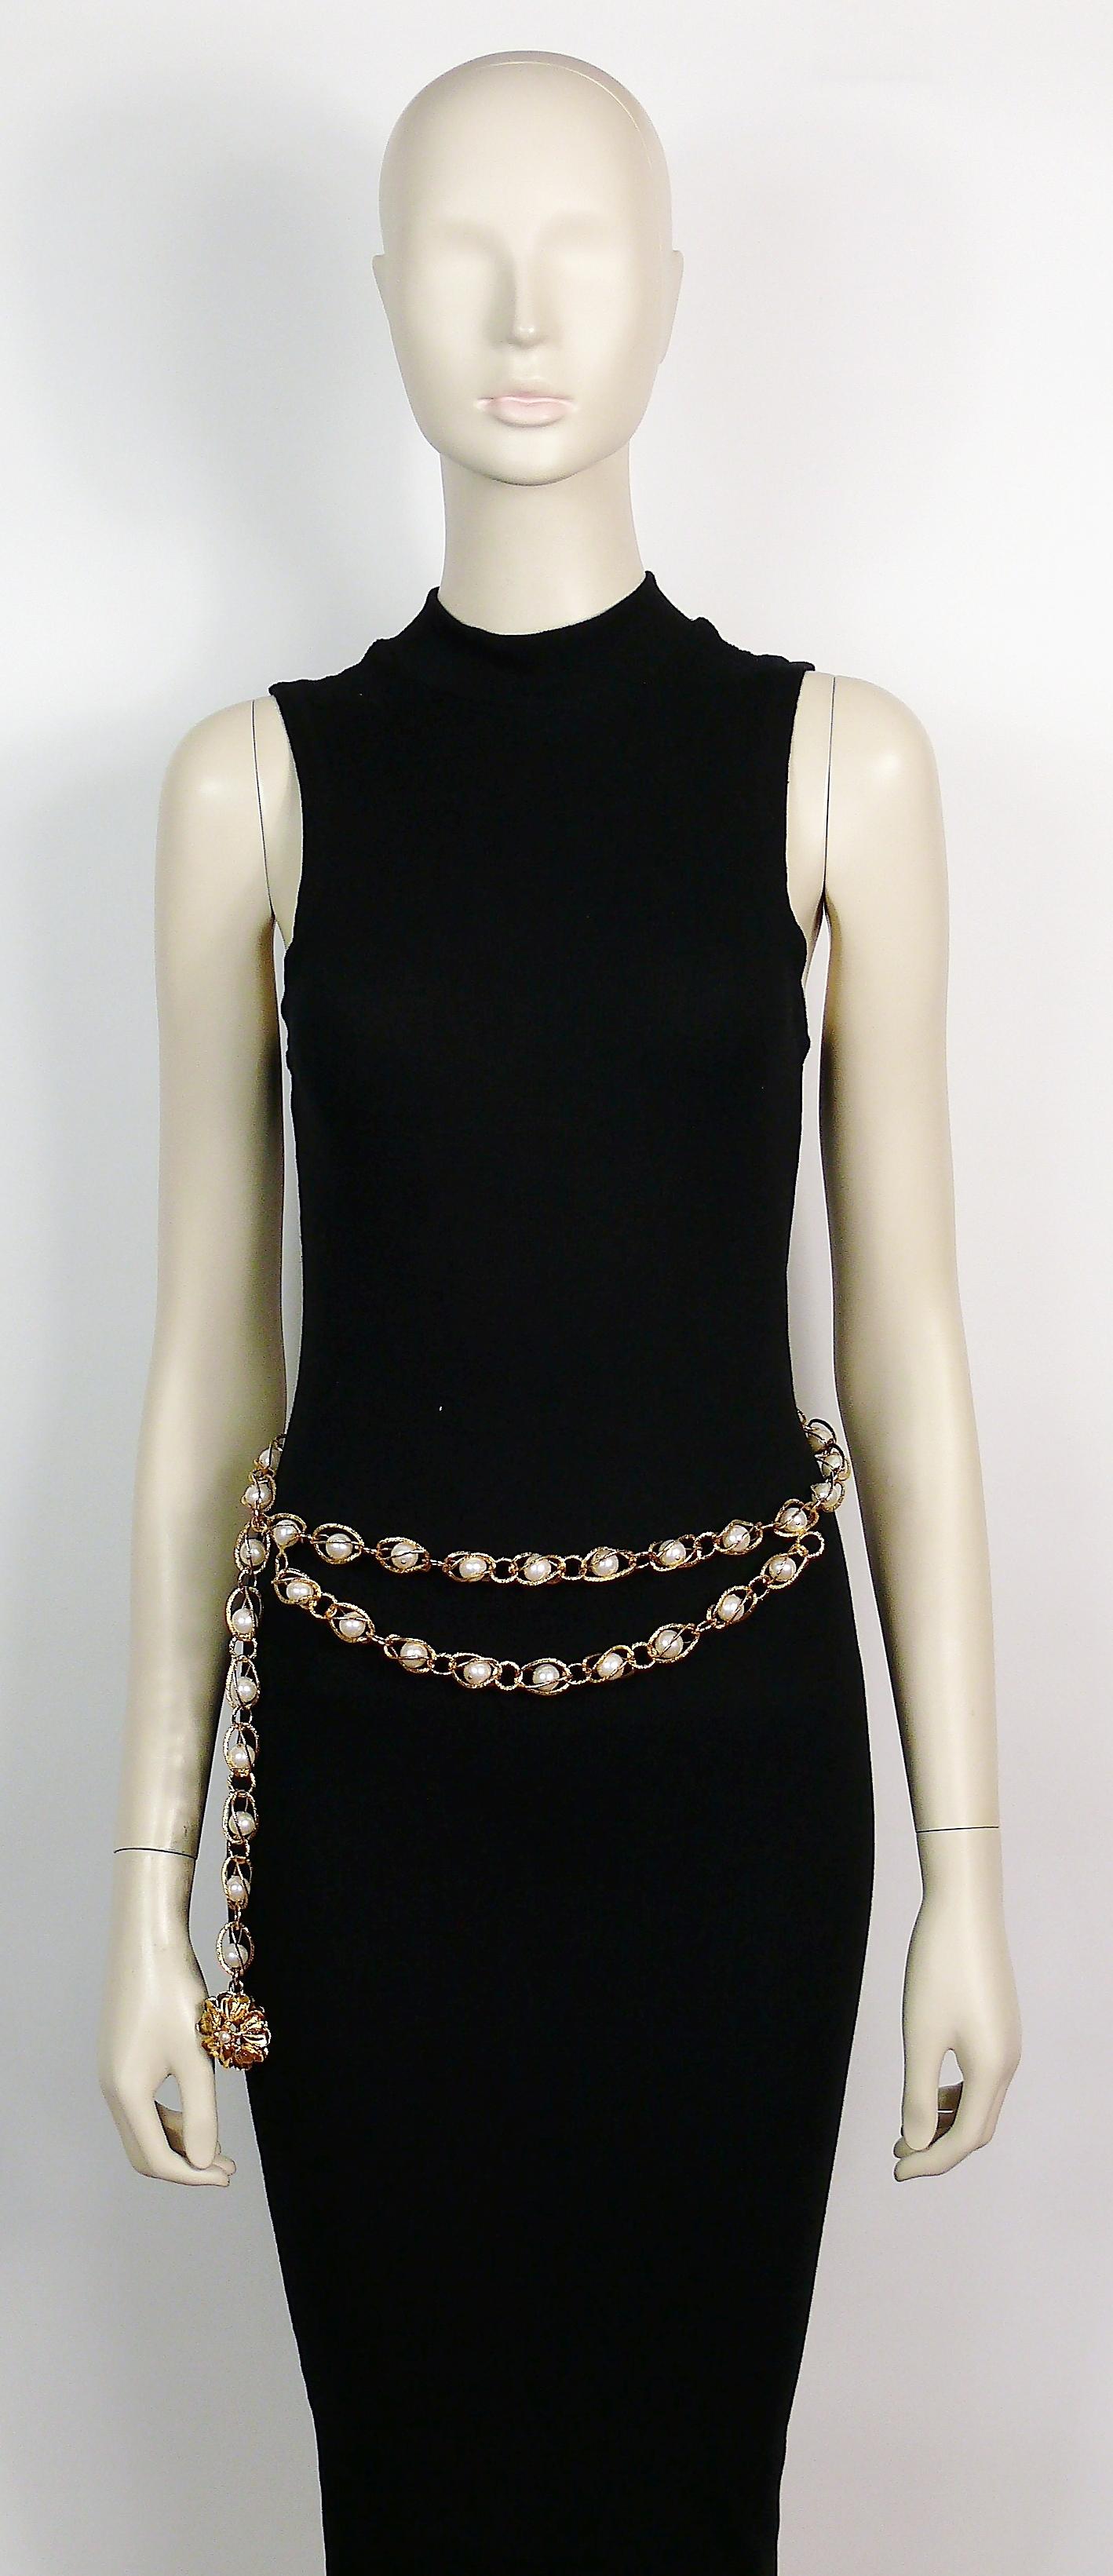 CHANEL gold toned belt featuring a chain-link of gold spheric cages encasing faux pearls, two hanging tiers and gold flower charm.

Hook clasp.
Adjustable length. One size fits all.

Embossed CHANEL.

Indicative measurements : max. wearable length